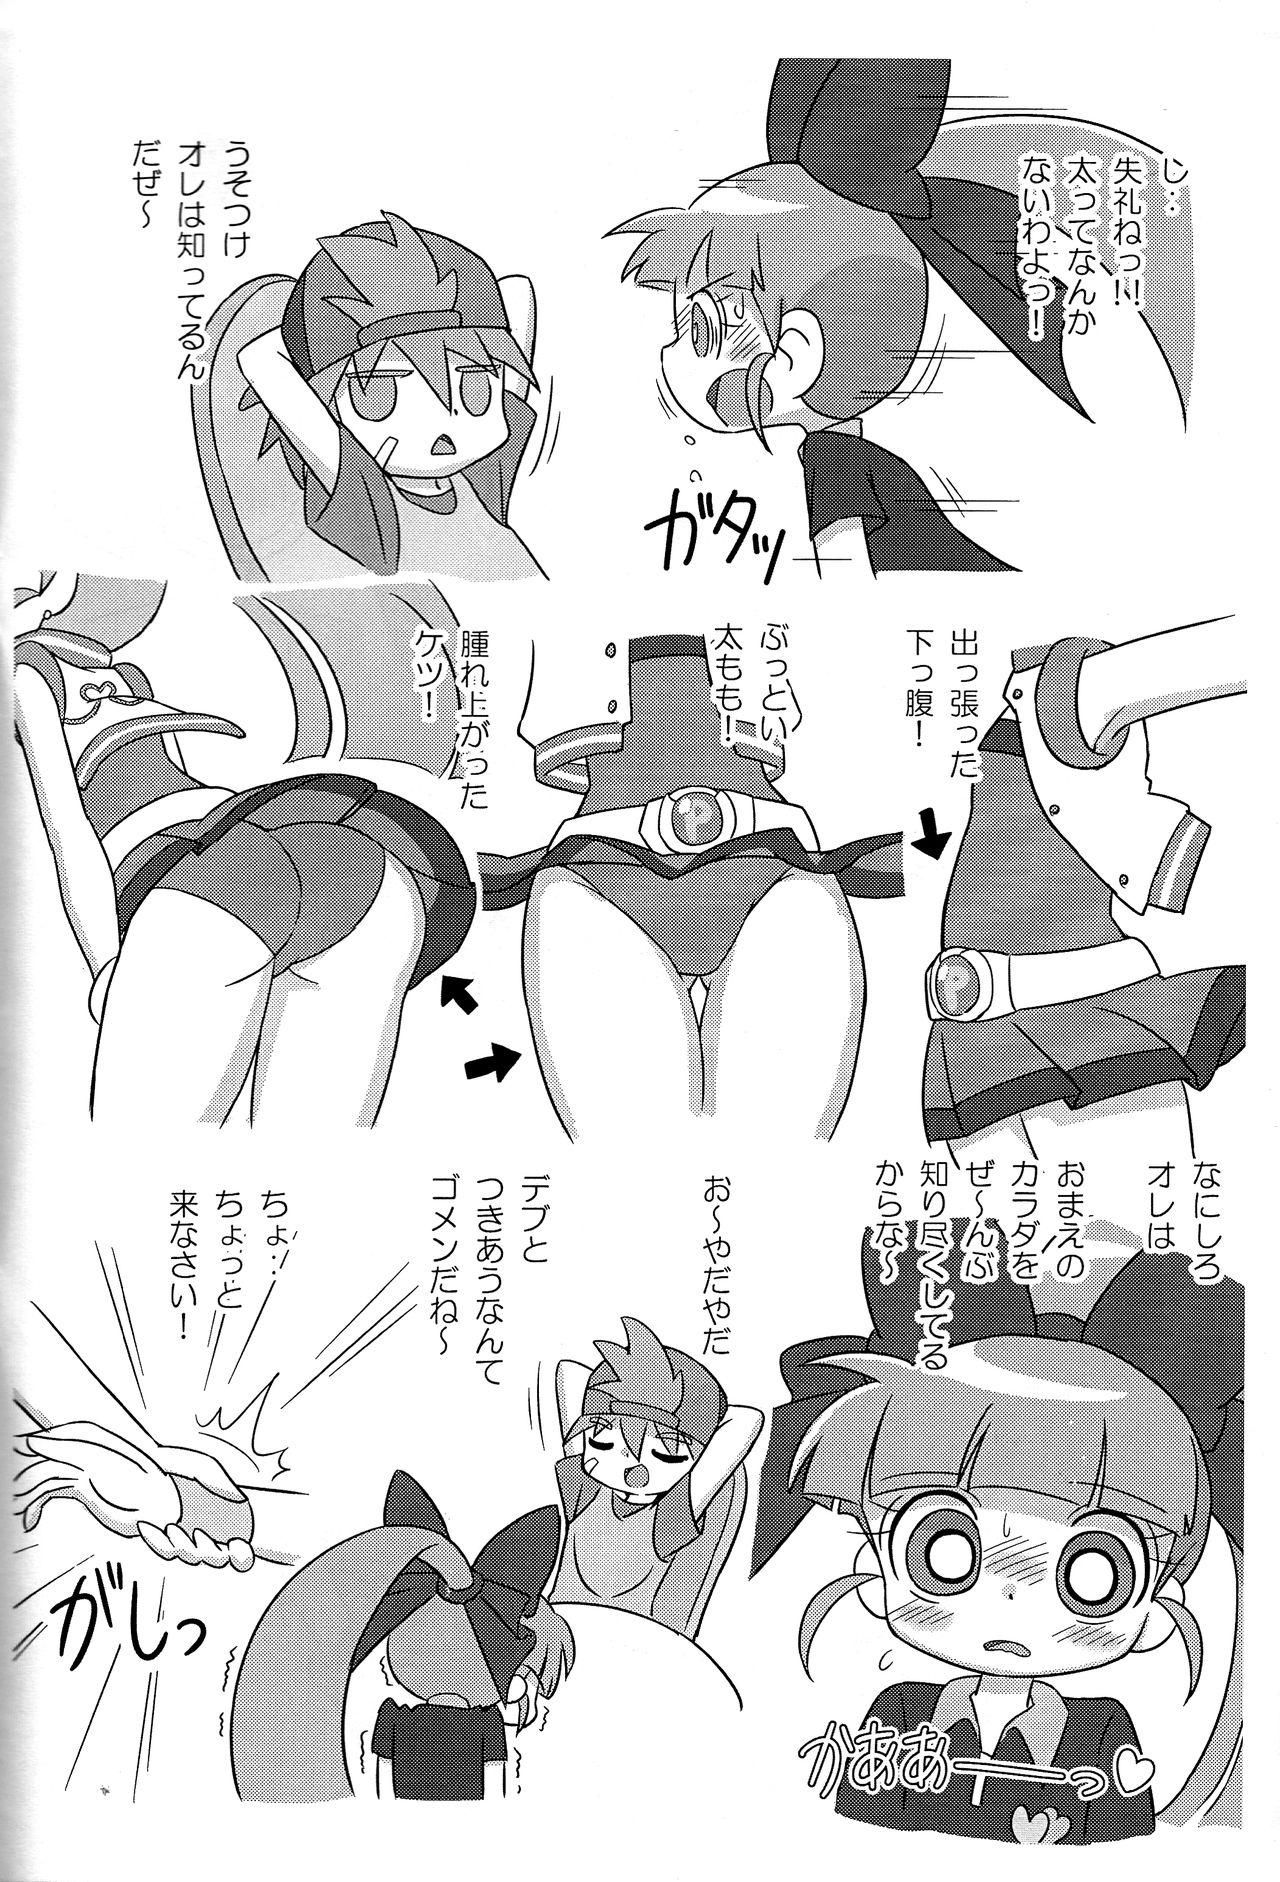 Petite Teenager 1-A Vol. 4 - Powerpuff girls z Transsexual - Page 3